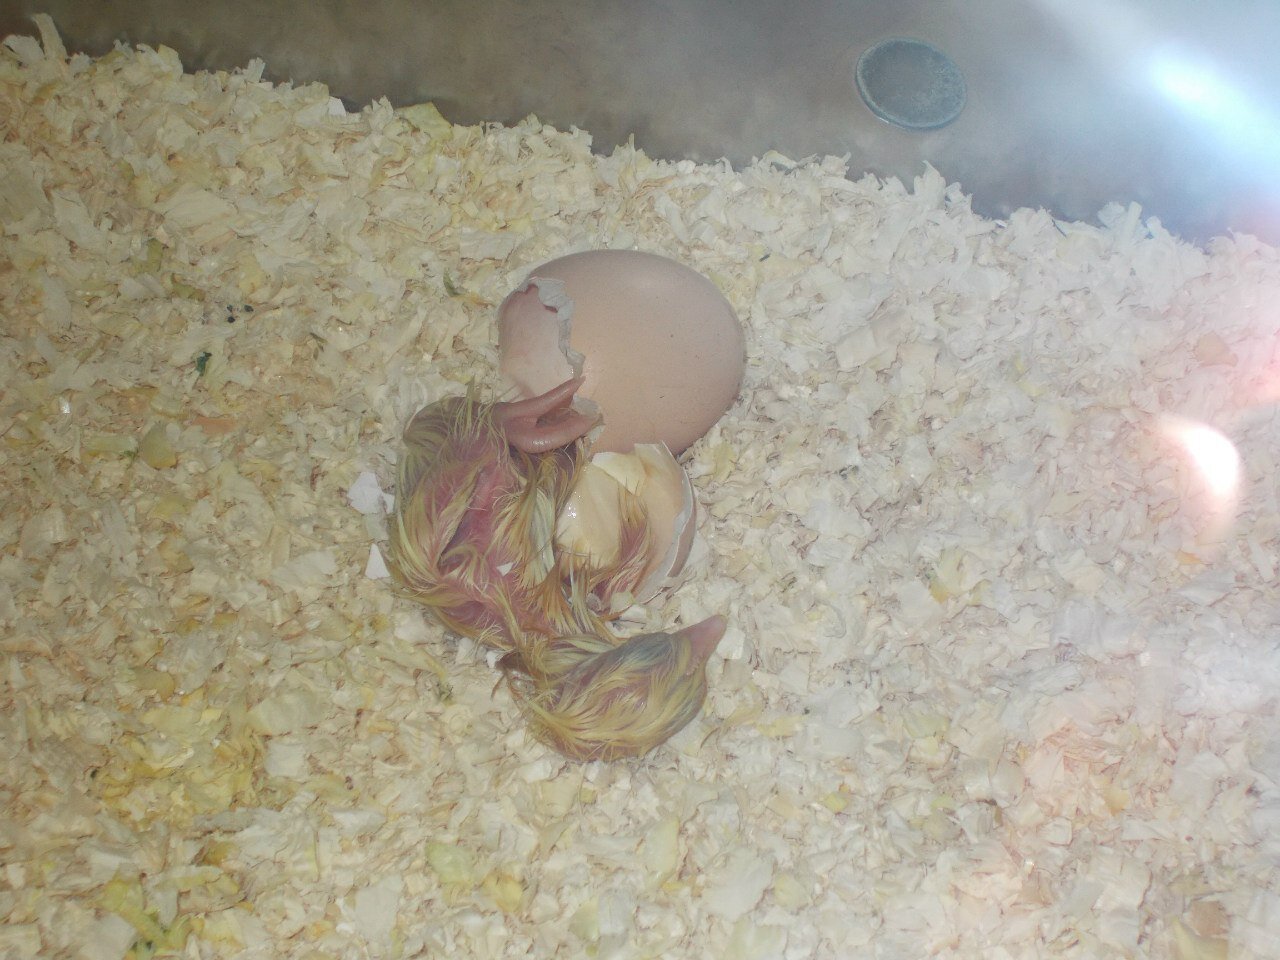 A chick just hatched from an egg.